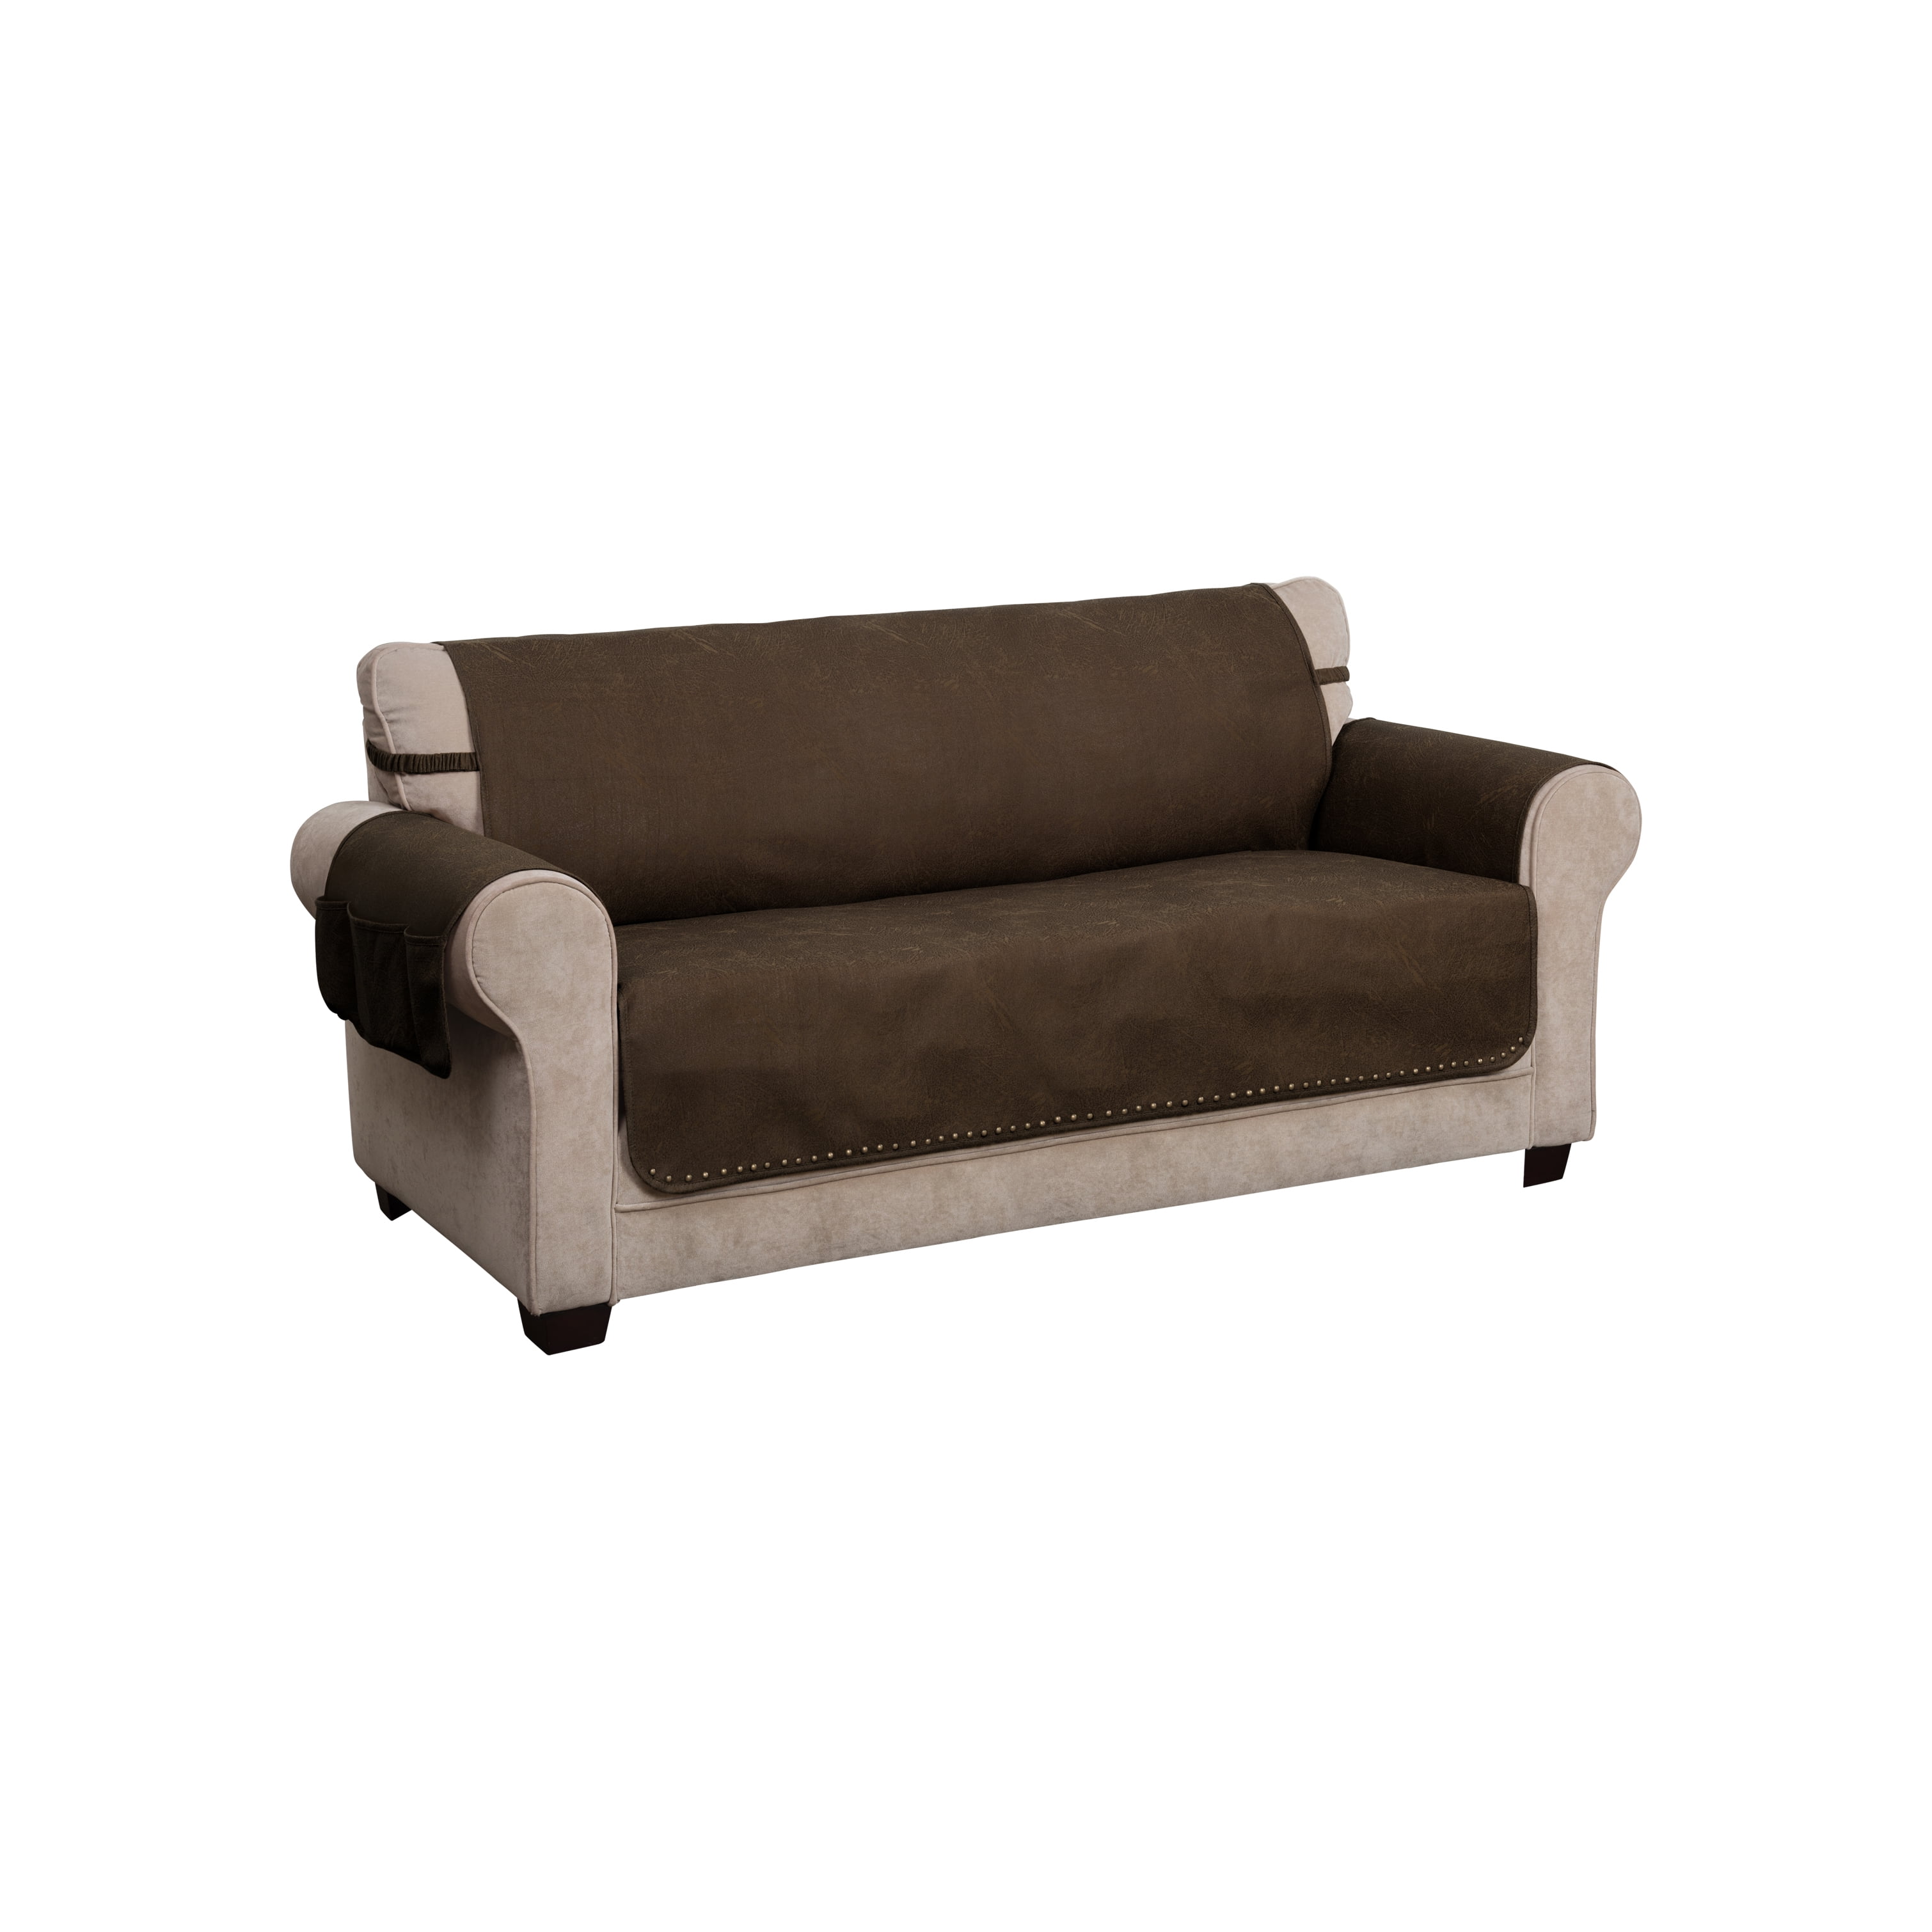 Faux Leather Solid Sofa Furniture Cover, Faux Leather Slipcover